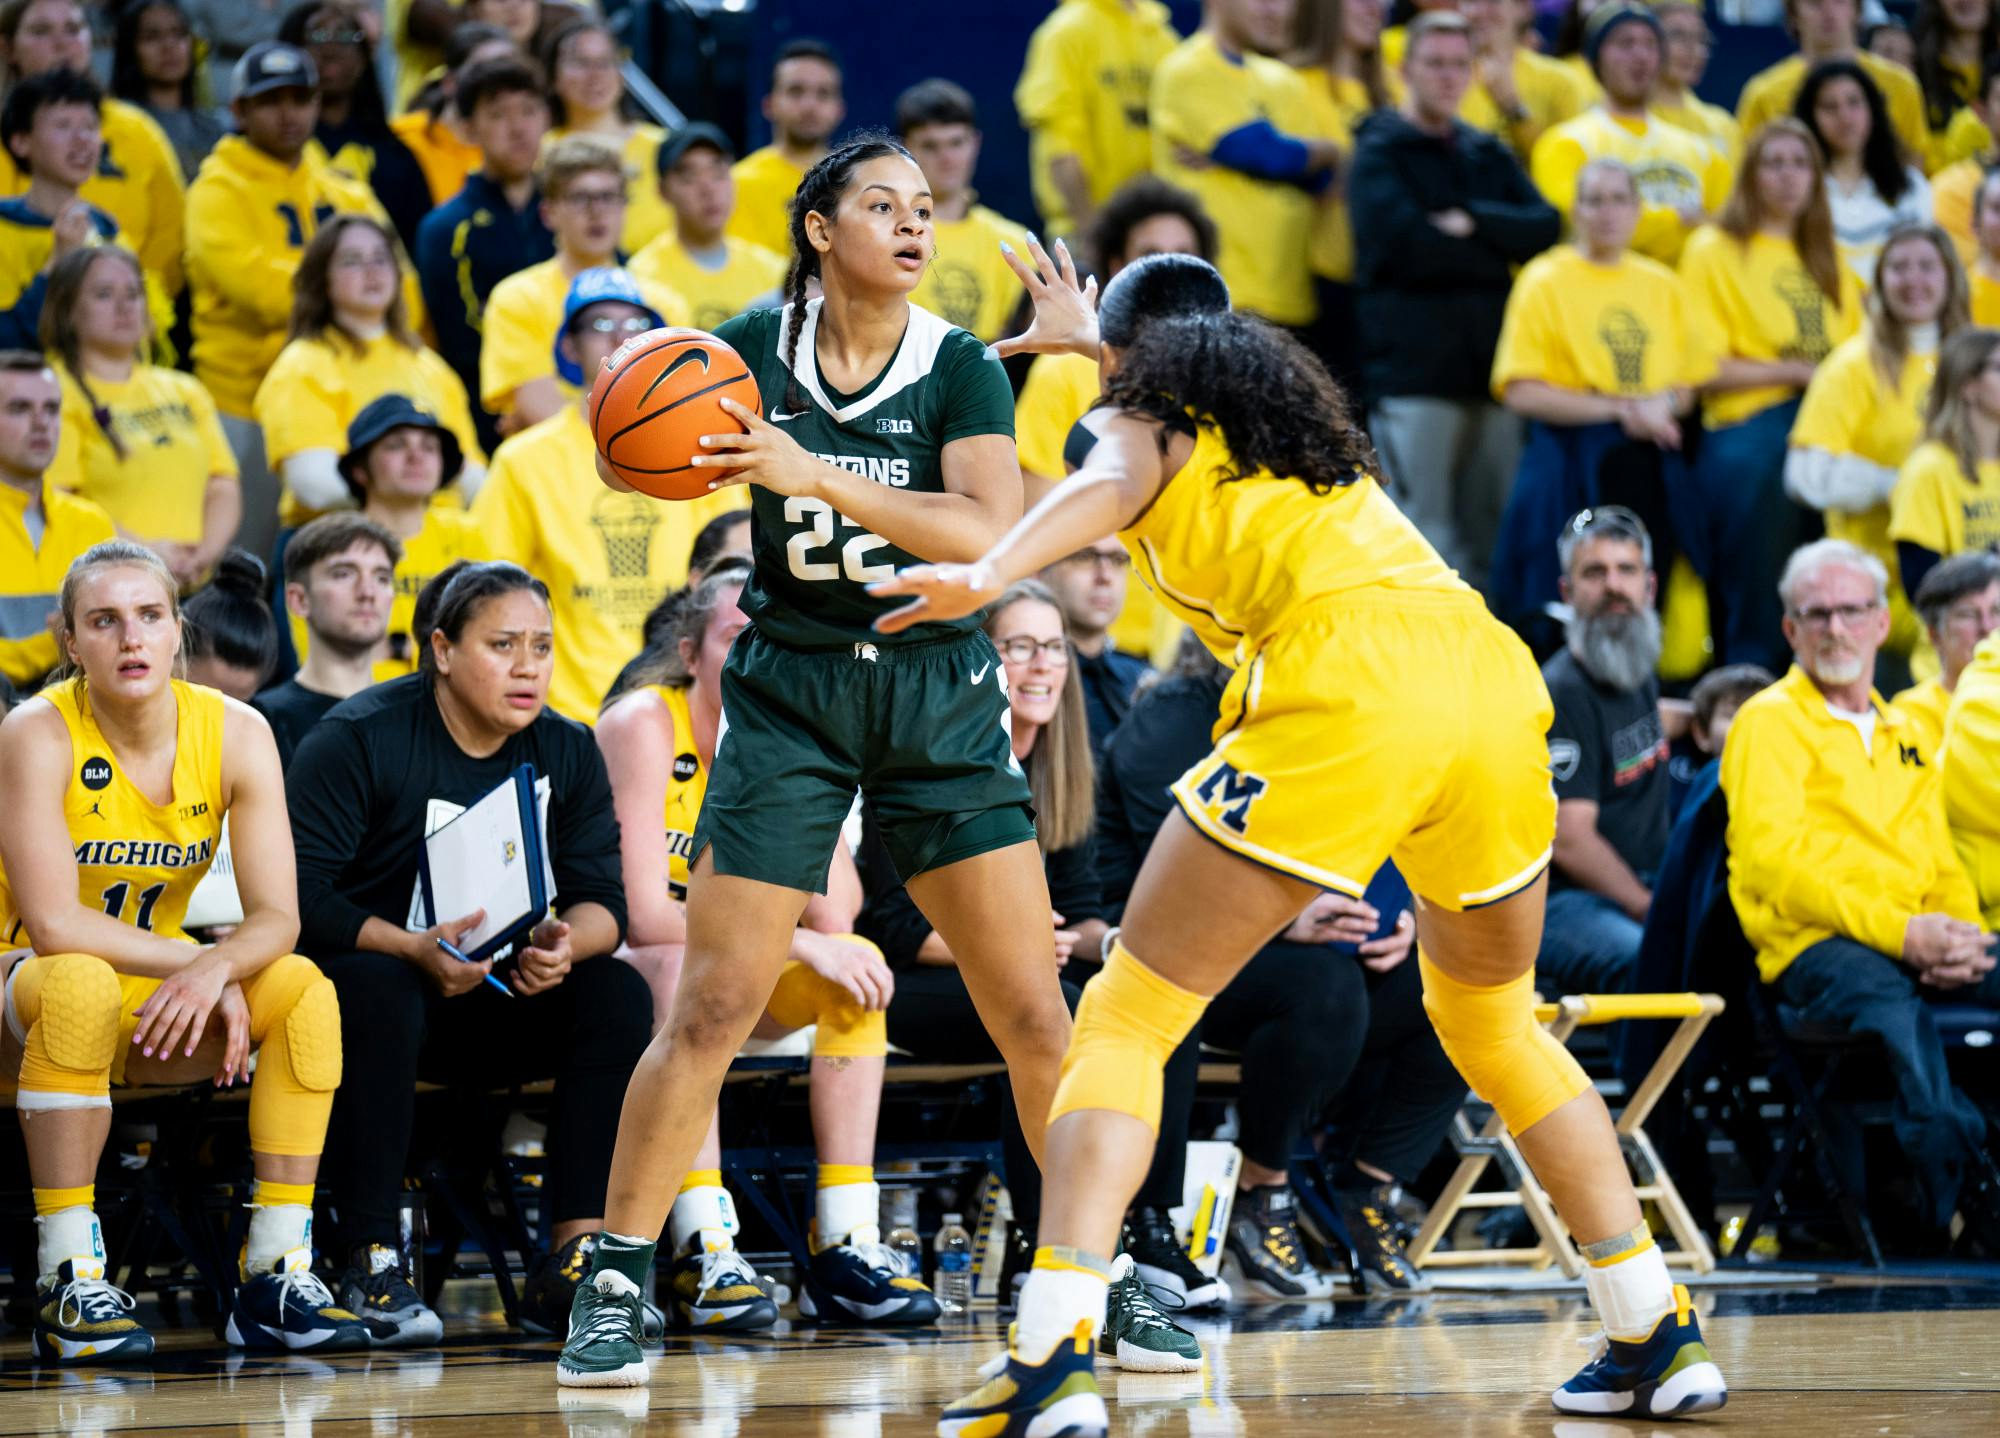 <p>Senior guard Moira Joiner (22) looks to see who to pass the ball to during a game against Michigan at the Crisler Center on Jan. 14, 2023. The Spartans lost to the Wolverines 70-55. </p>